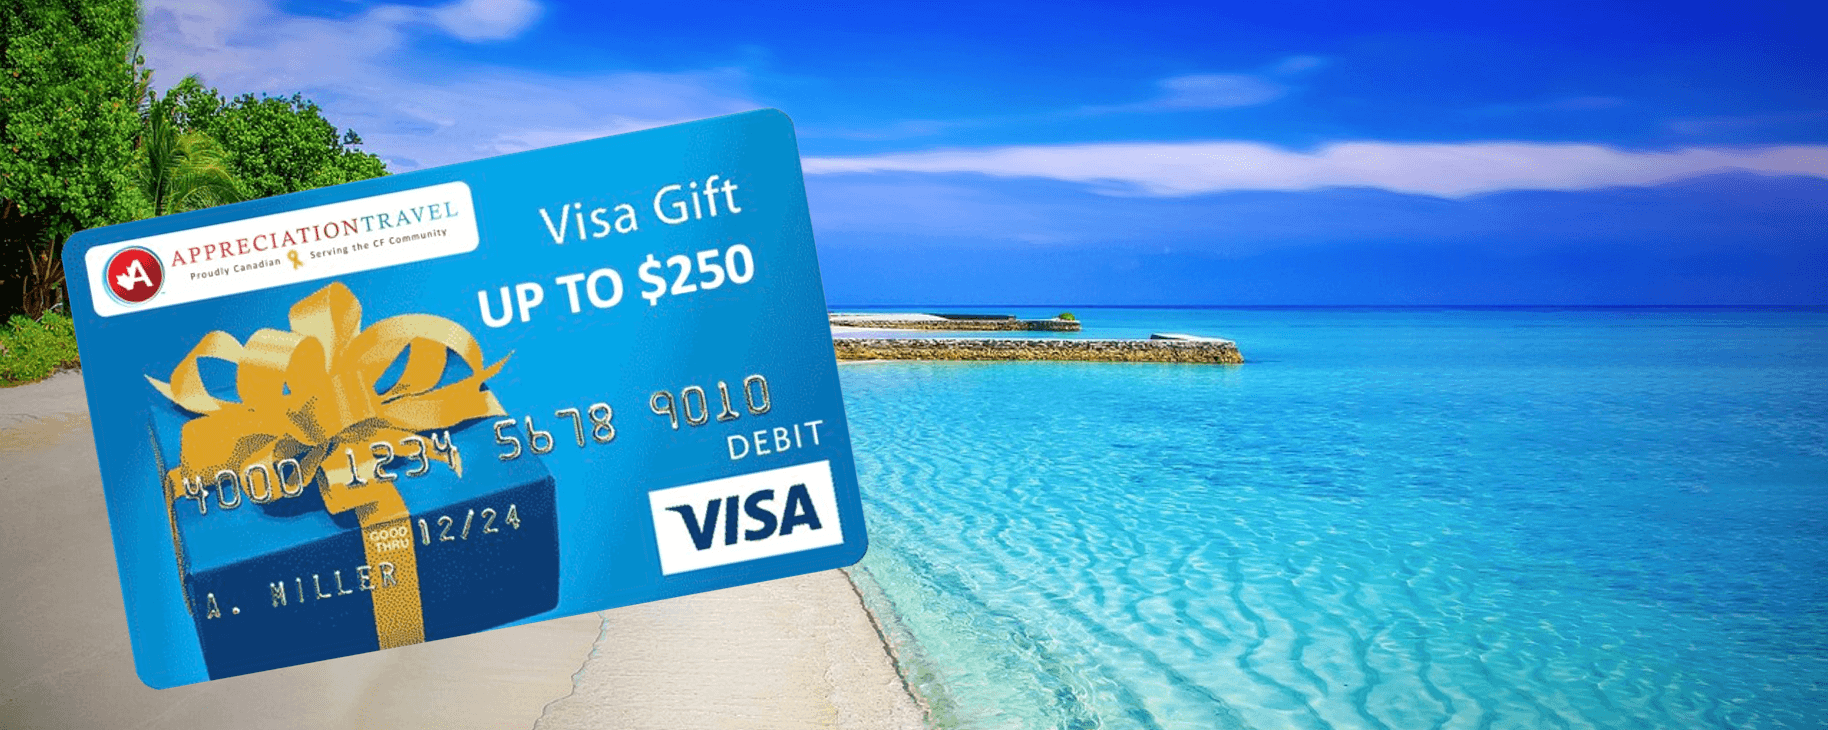 RECEIVE UP TO $250 IN VISA GIFT CARDS WHEN YOU BOOK - background banner